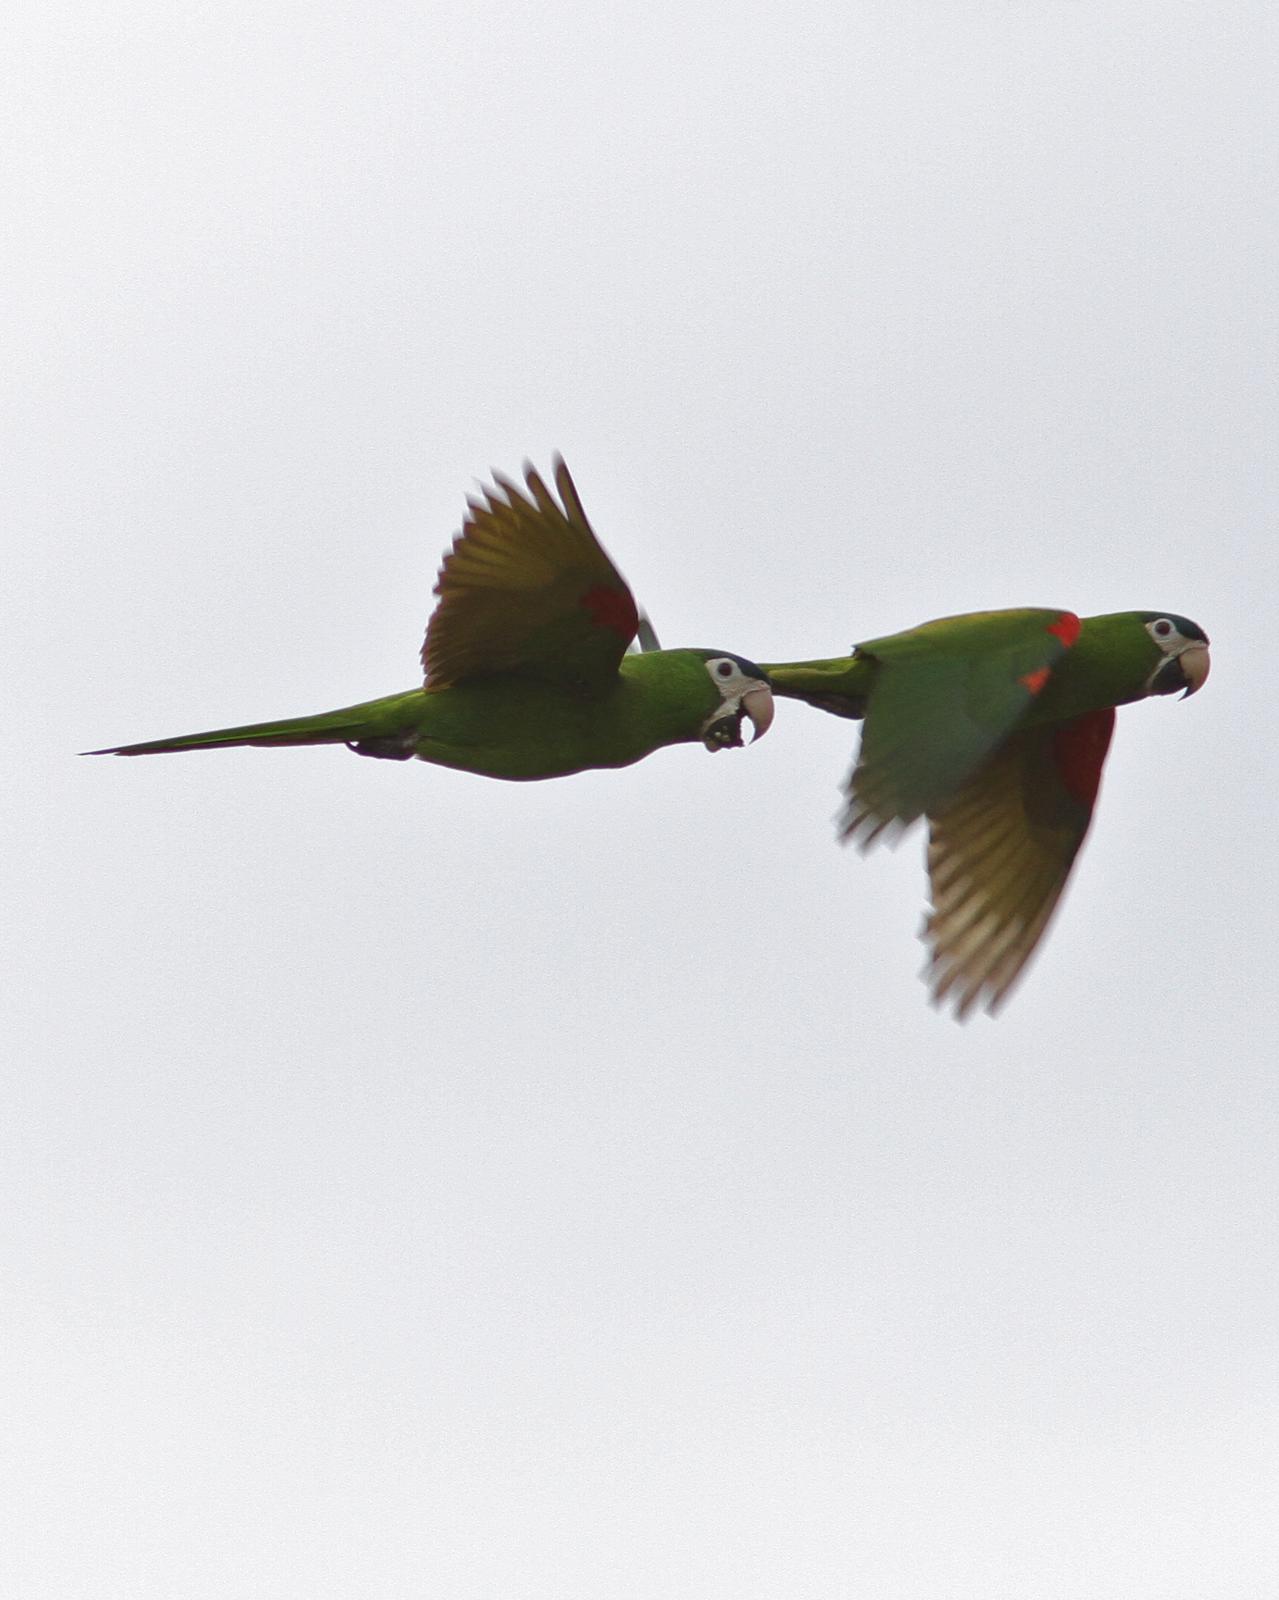 Red-shouldered Macaw Photo by Marcelo Padua